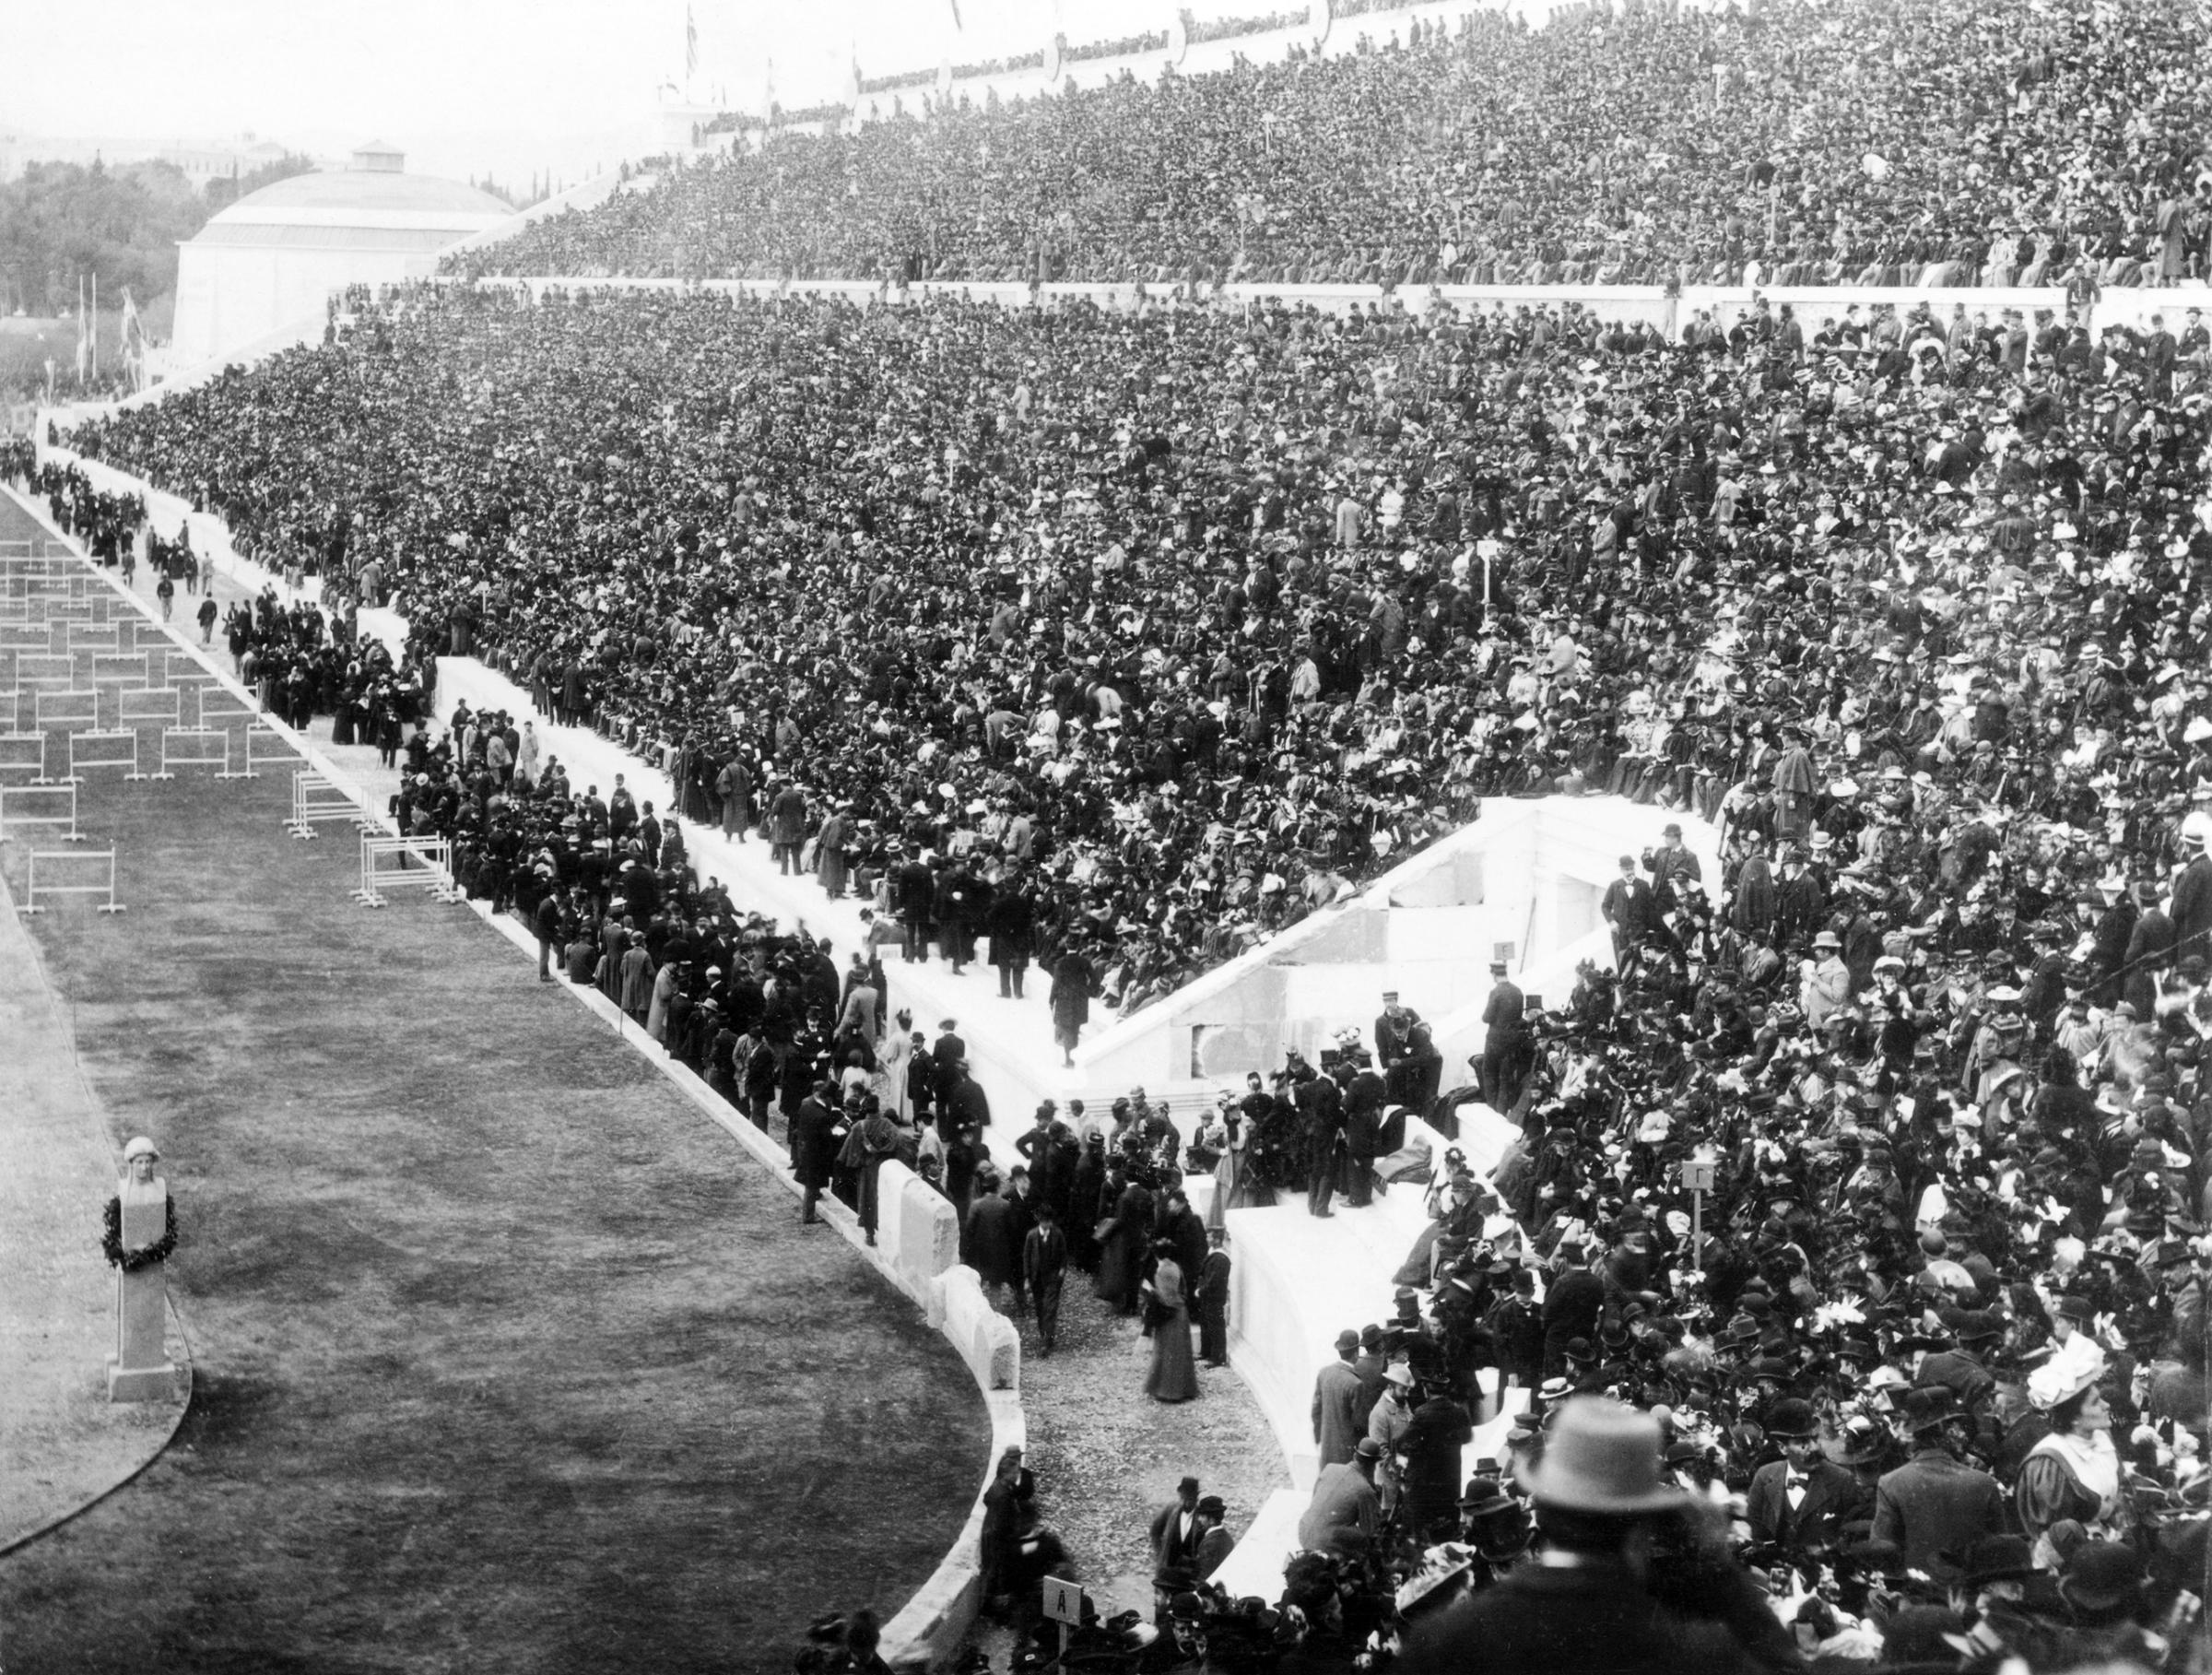 Pan-Athenian stadium before a hurdles event at the 1896 Olympic Games in Athens, Greece.